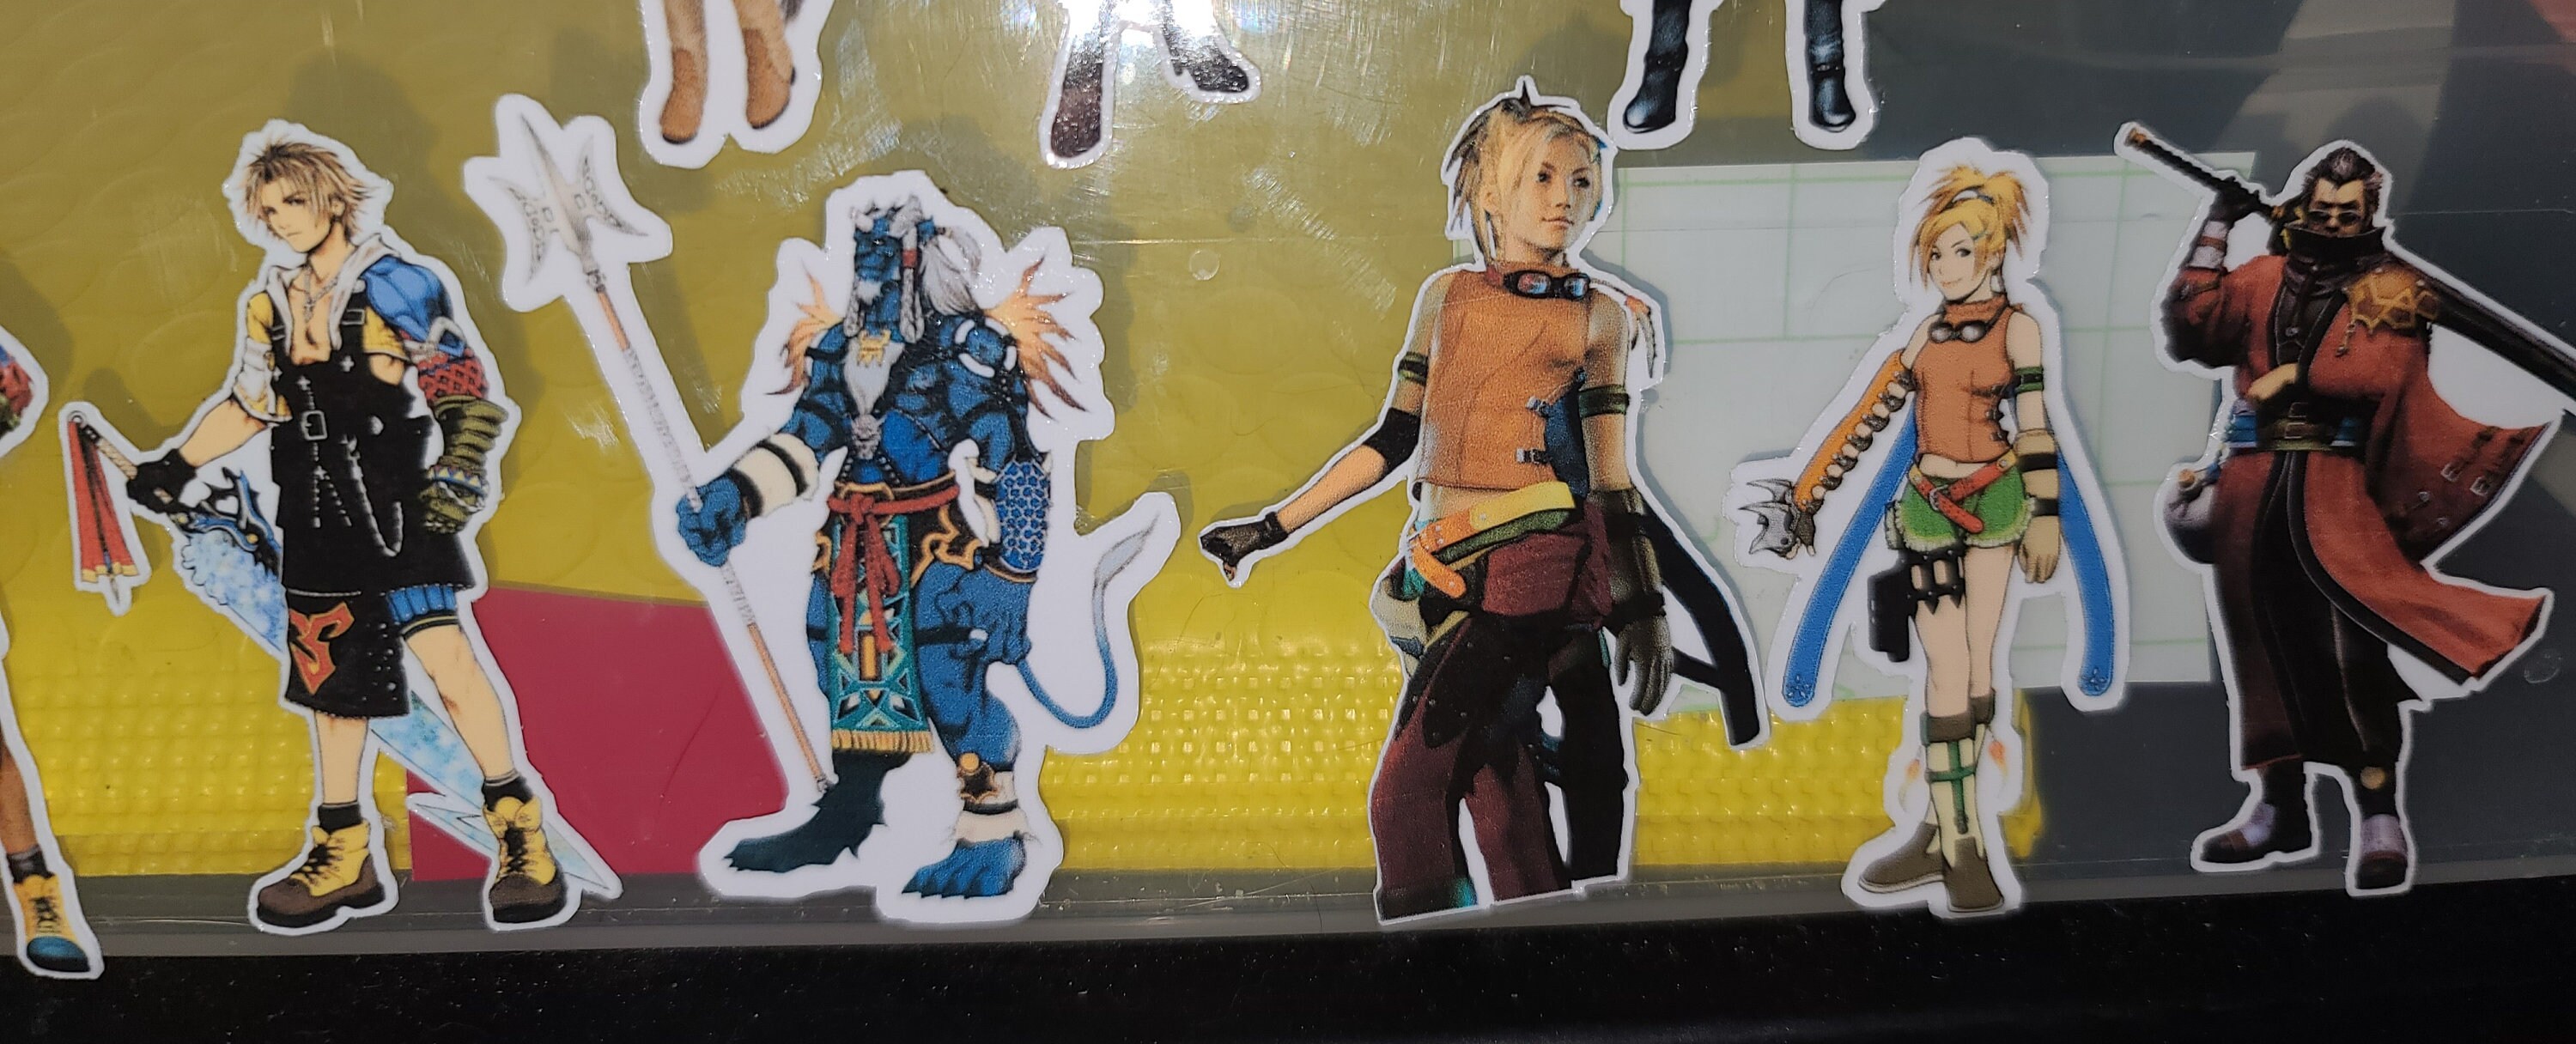 Final Fantasy X Stickers for Sale